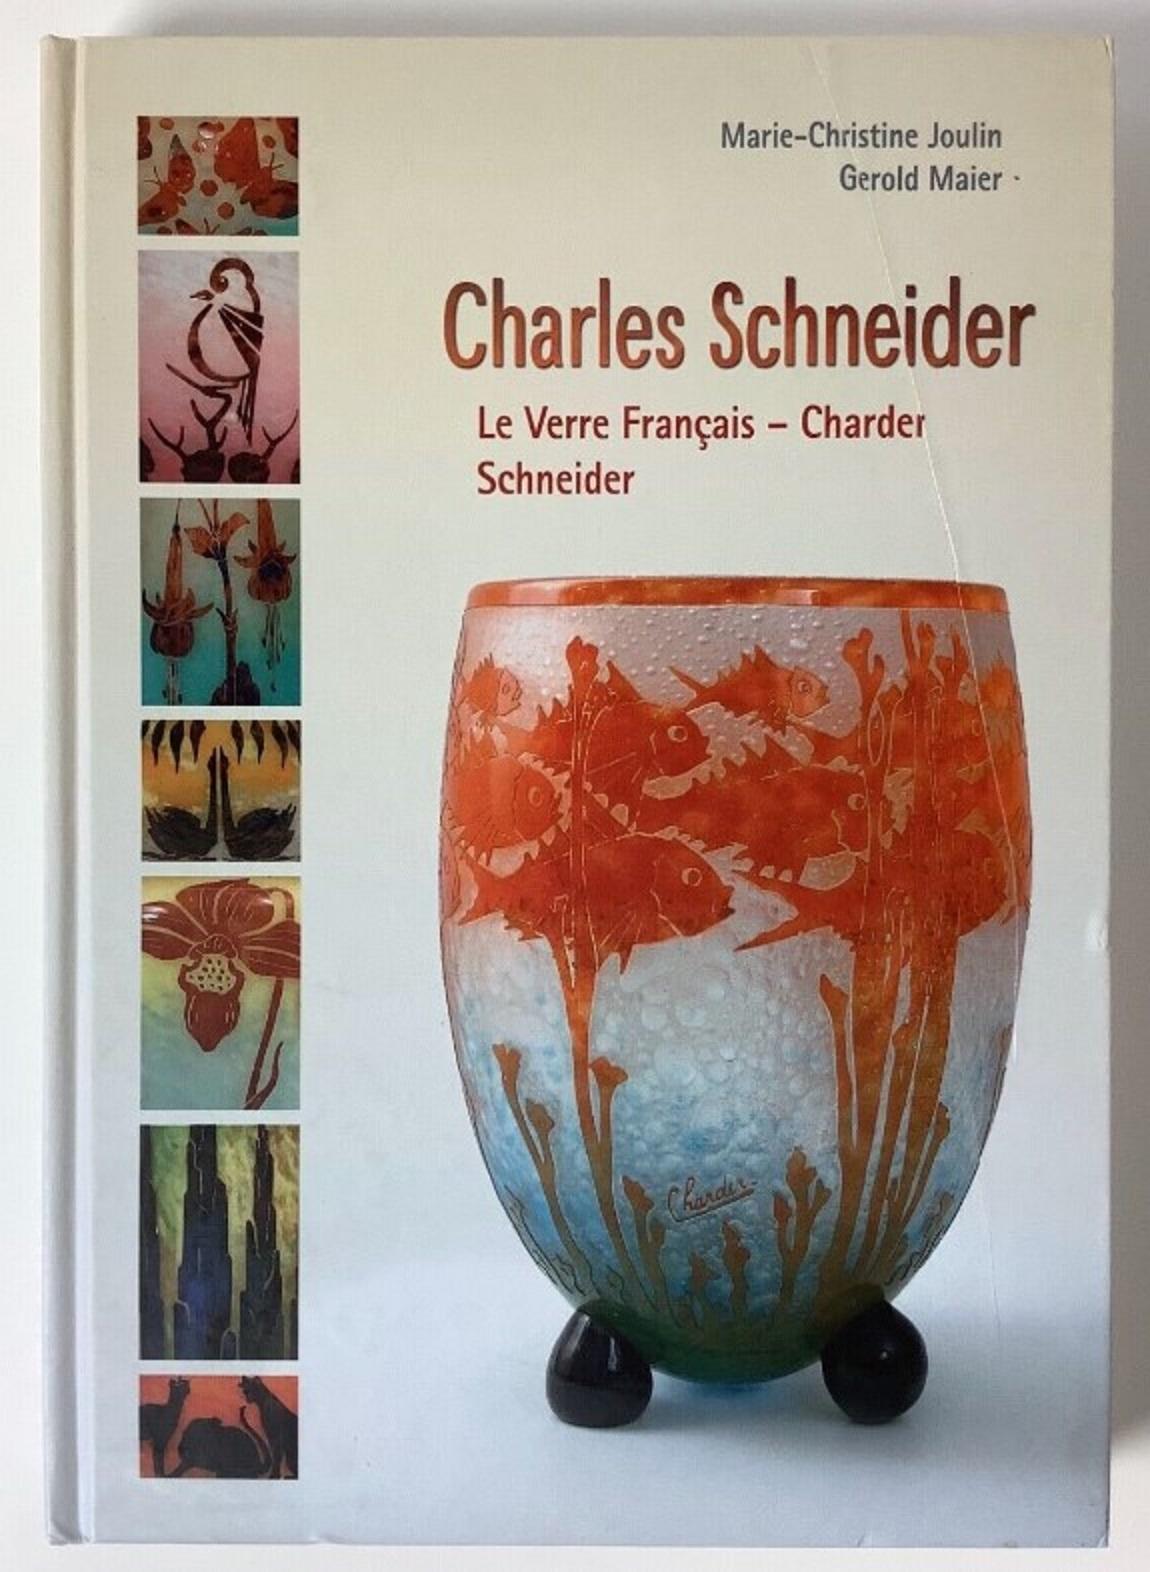 Vase Sign: Le Verre Francais  France
acid worked
Página: 123 libro Charles Schneider Le Verre Francais- Charder Schneider 
Autora: Marie Christine Joulin- Gerold Maier
Le Verre cameo glass was a separate line of art glass designed by Charles